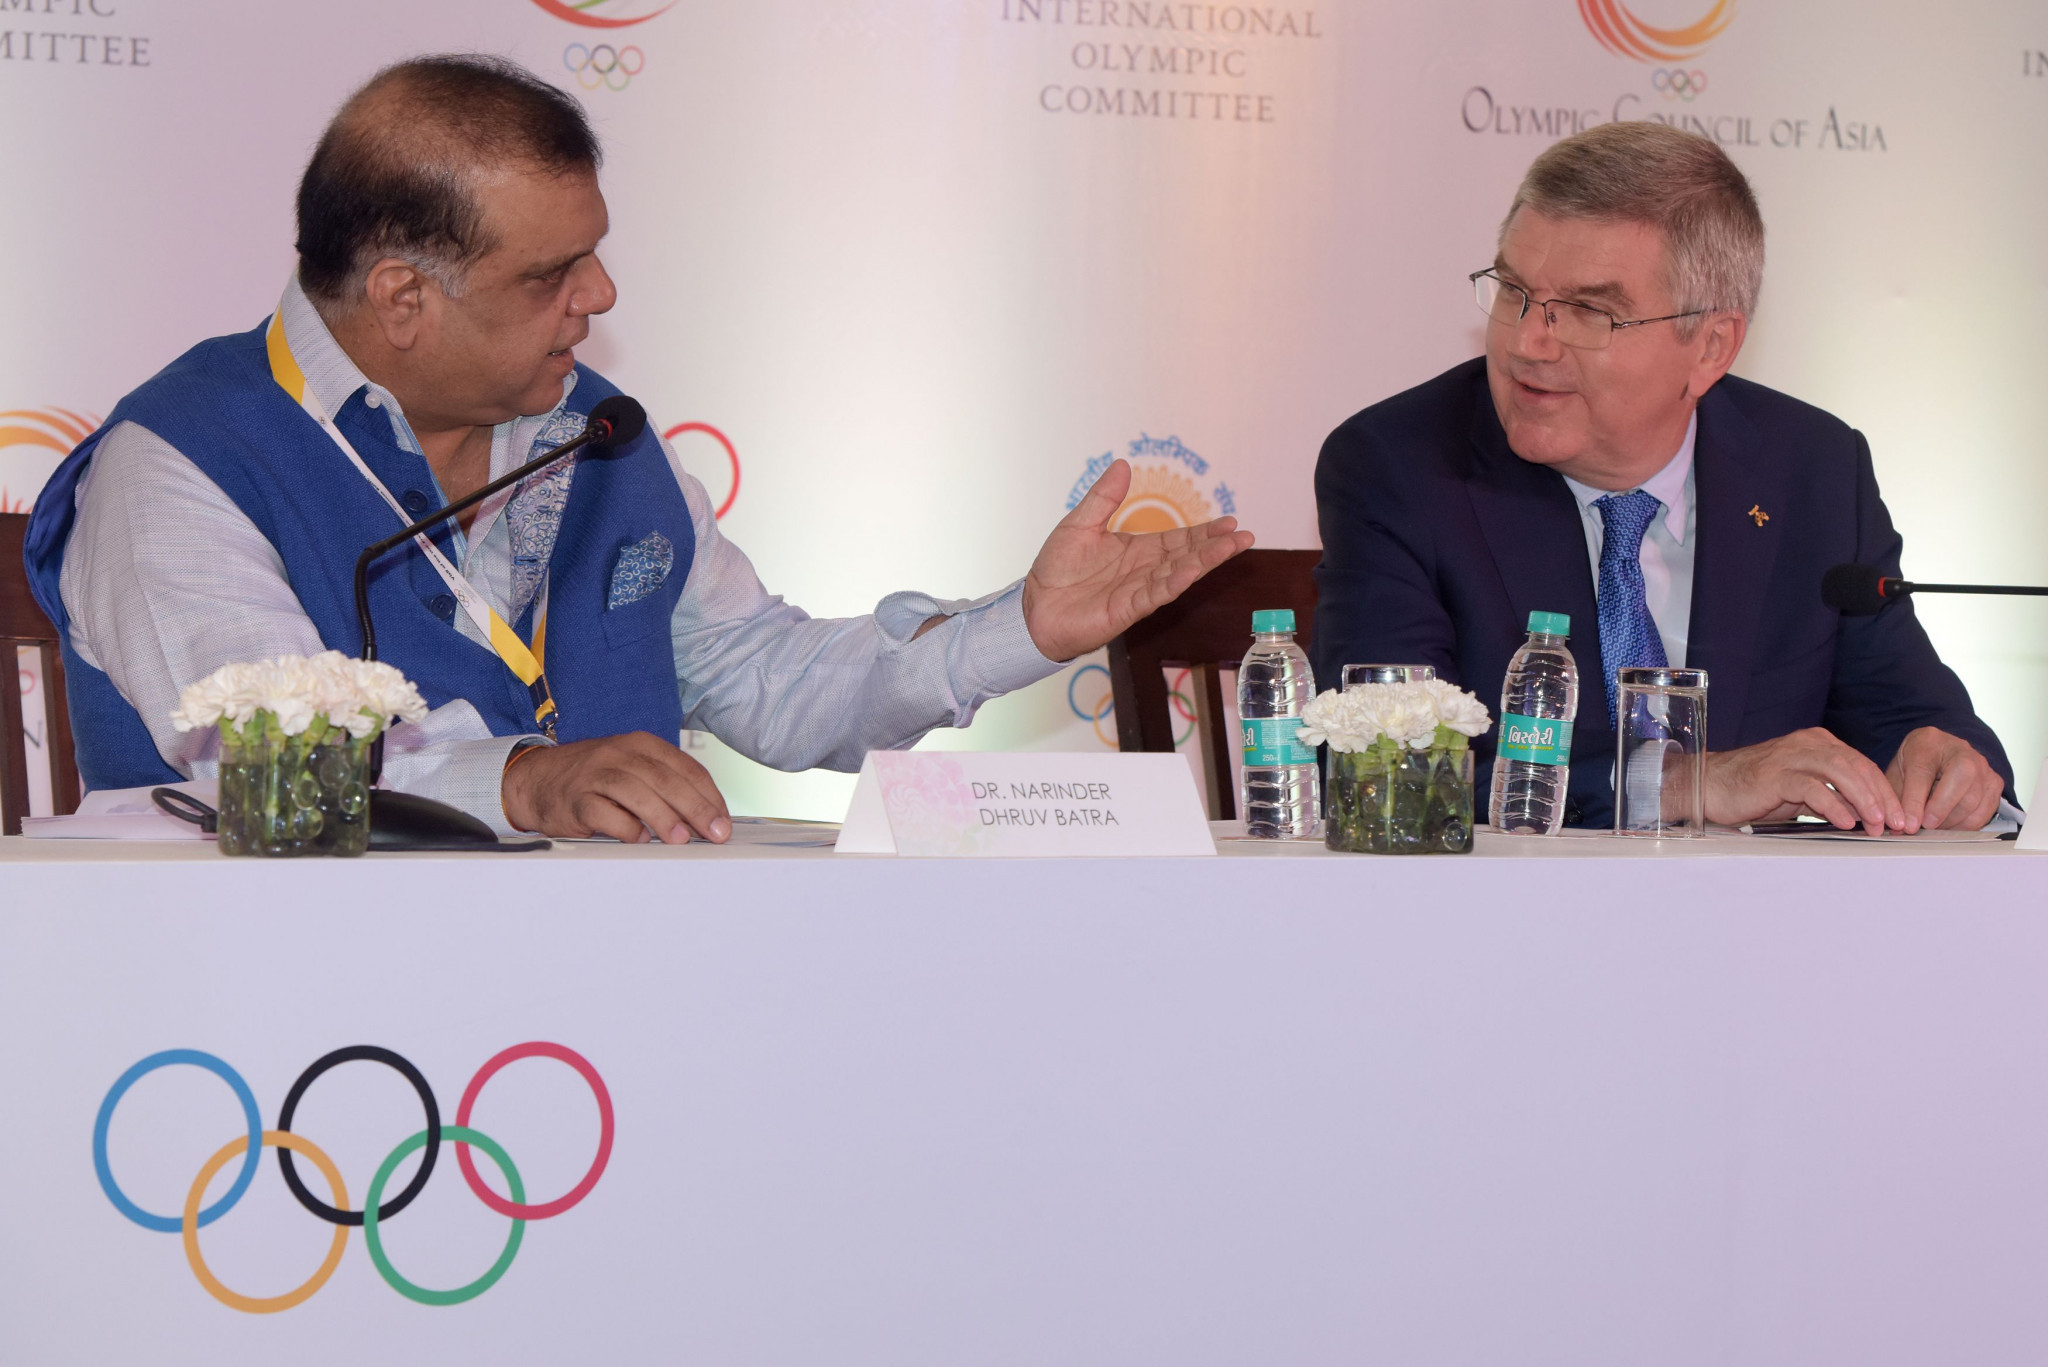 IOA President Narinder Batra became an IOC member earlier this year ©Getty Images